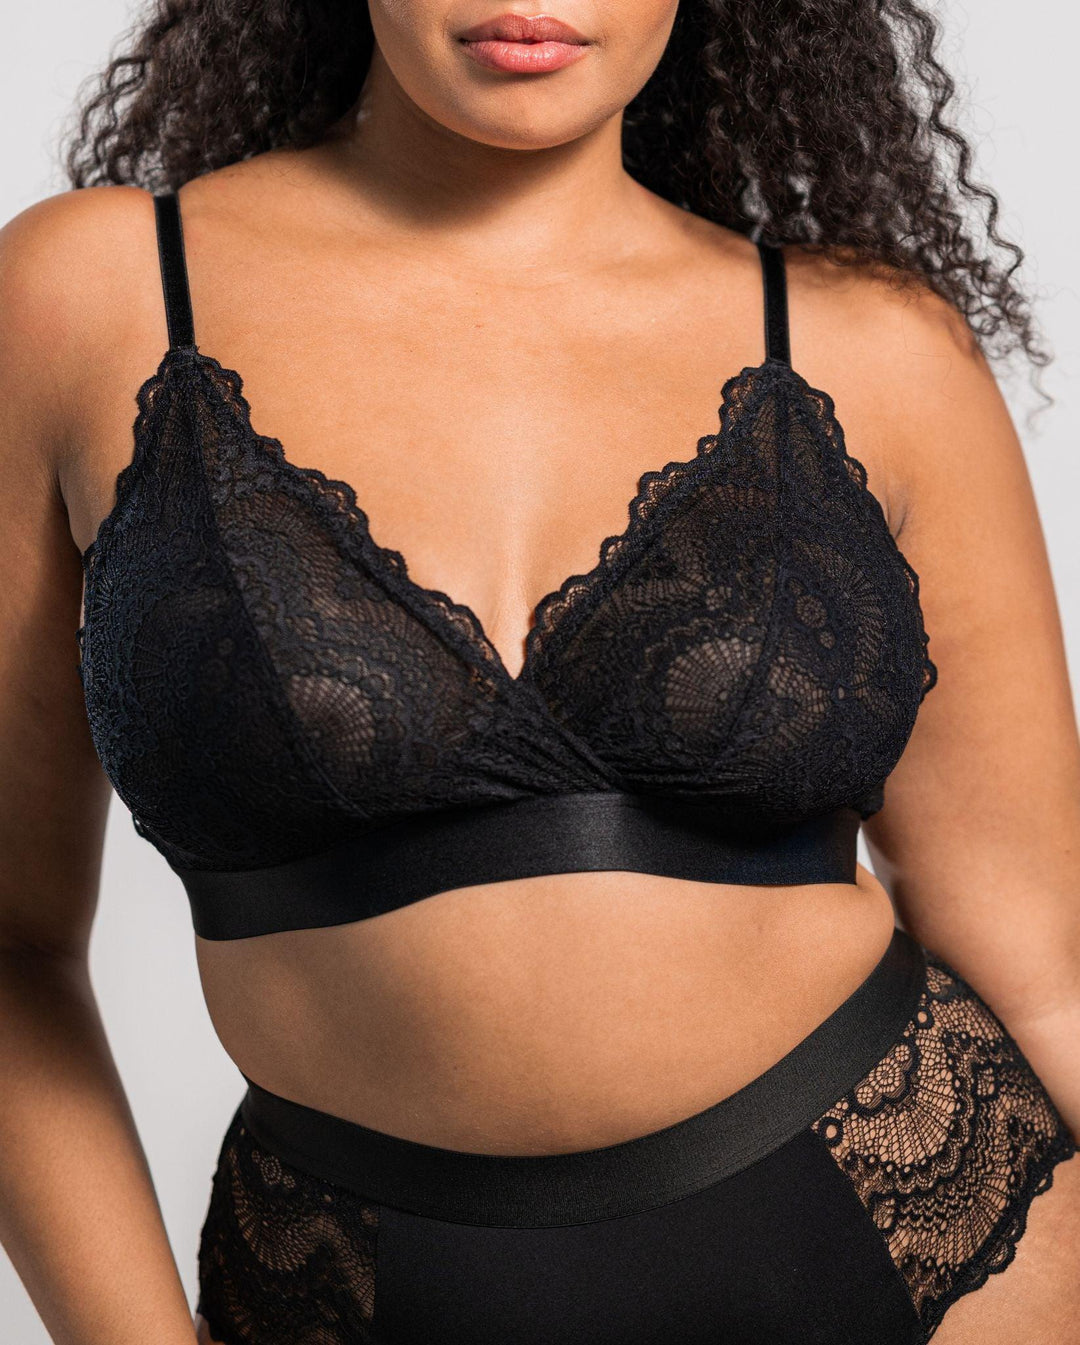 Lovable Underwired bra with preformed cups and enhancement│Cheeky panty